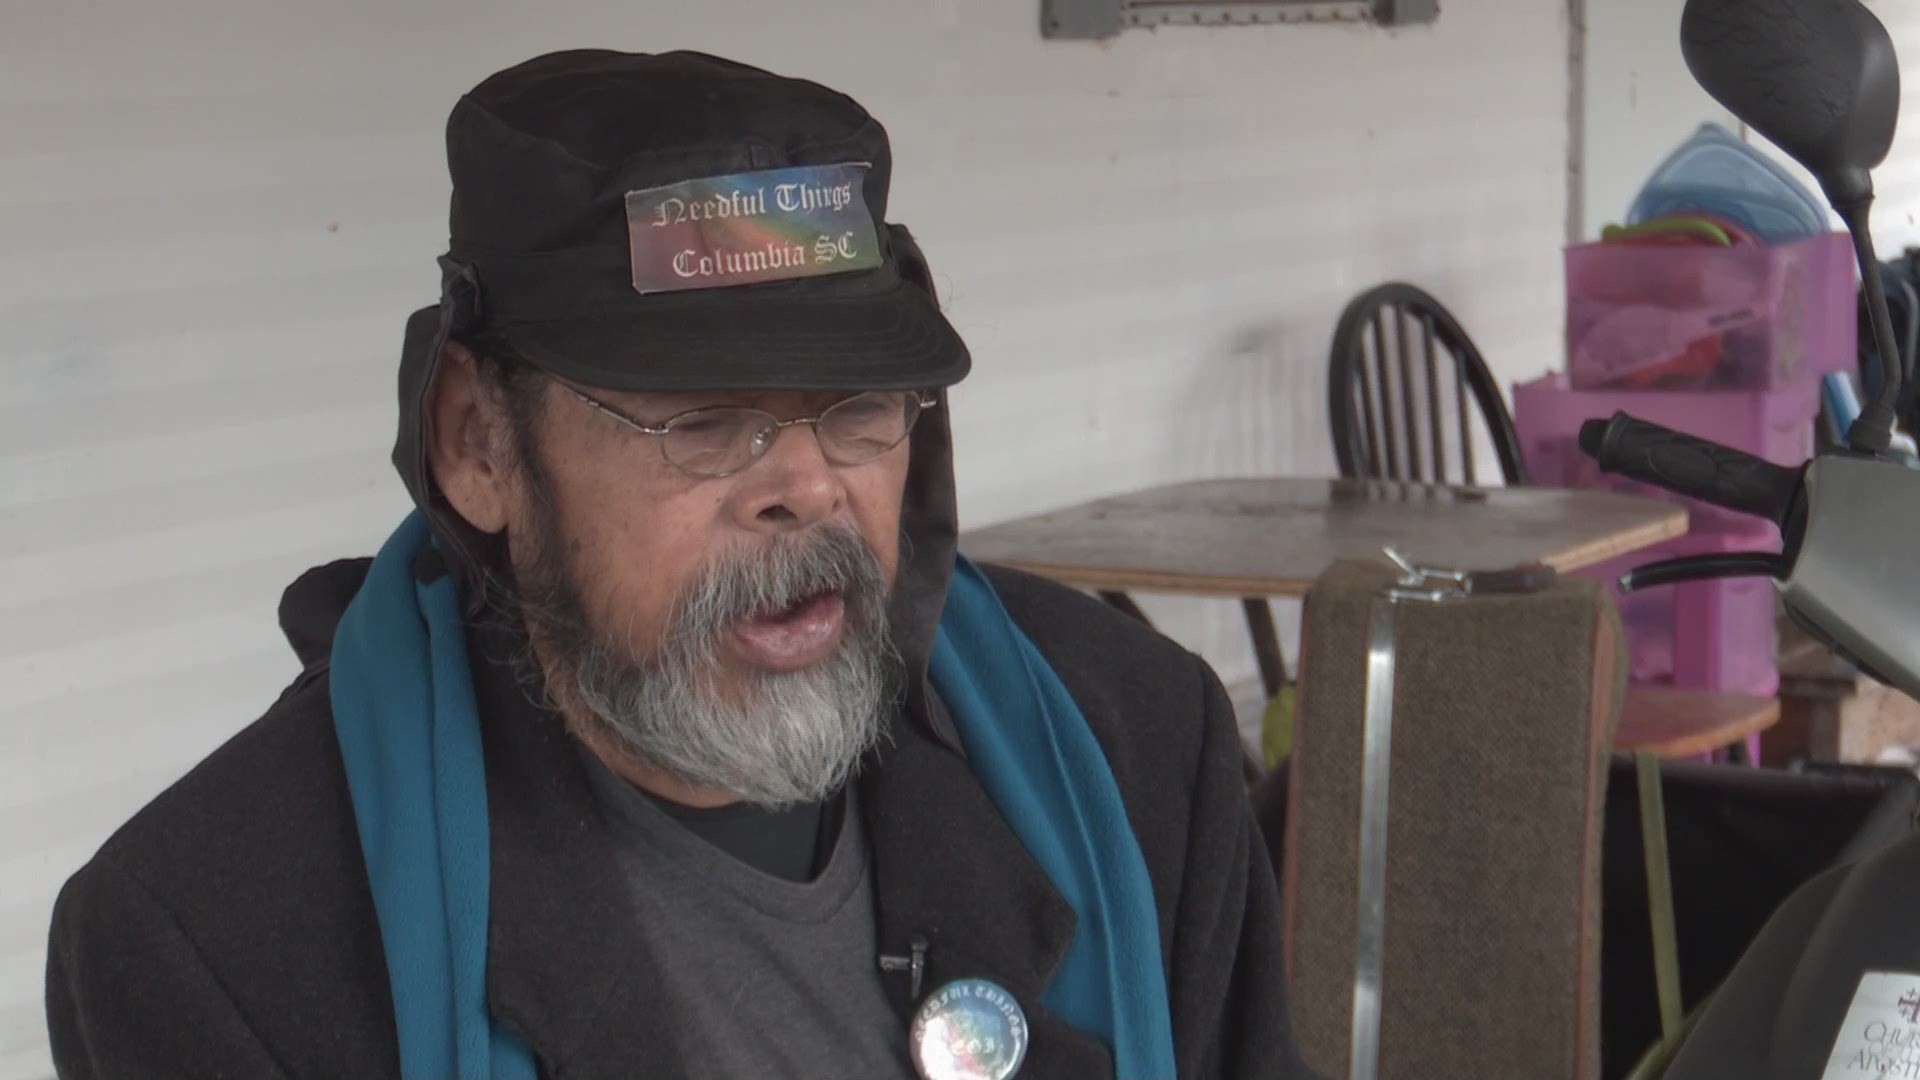 Full interview with Regi Solis as he reflects on the period in his life when he was homeless and his efforts to connect others with resources to get help.